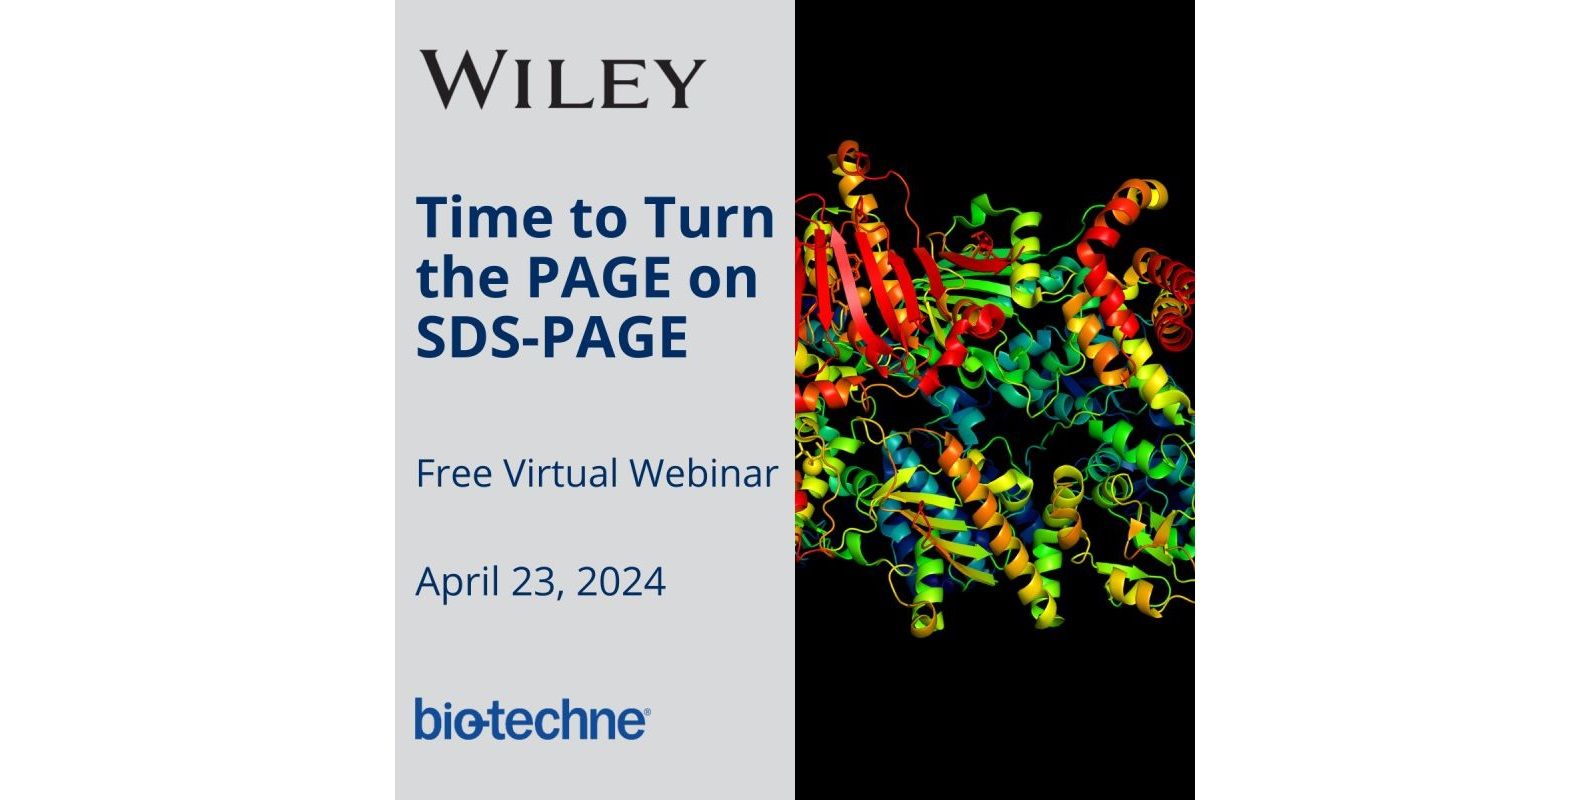 Wiley: Time to Turn the PAGE on SDS-PAGE!